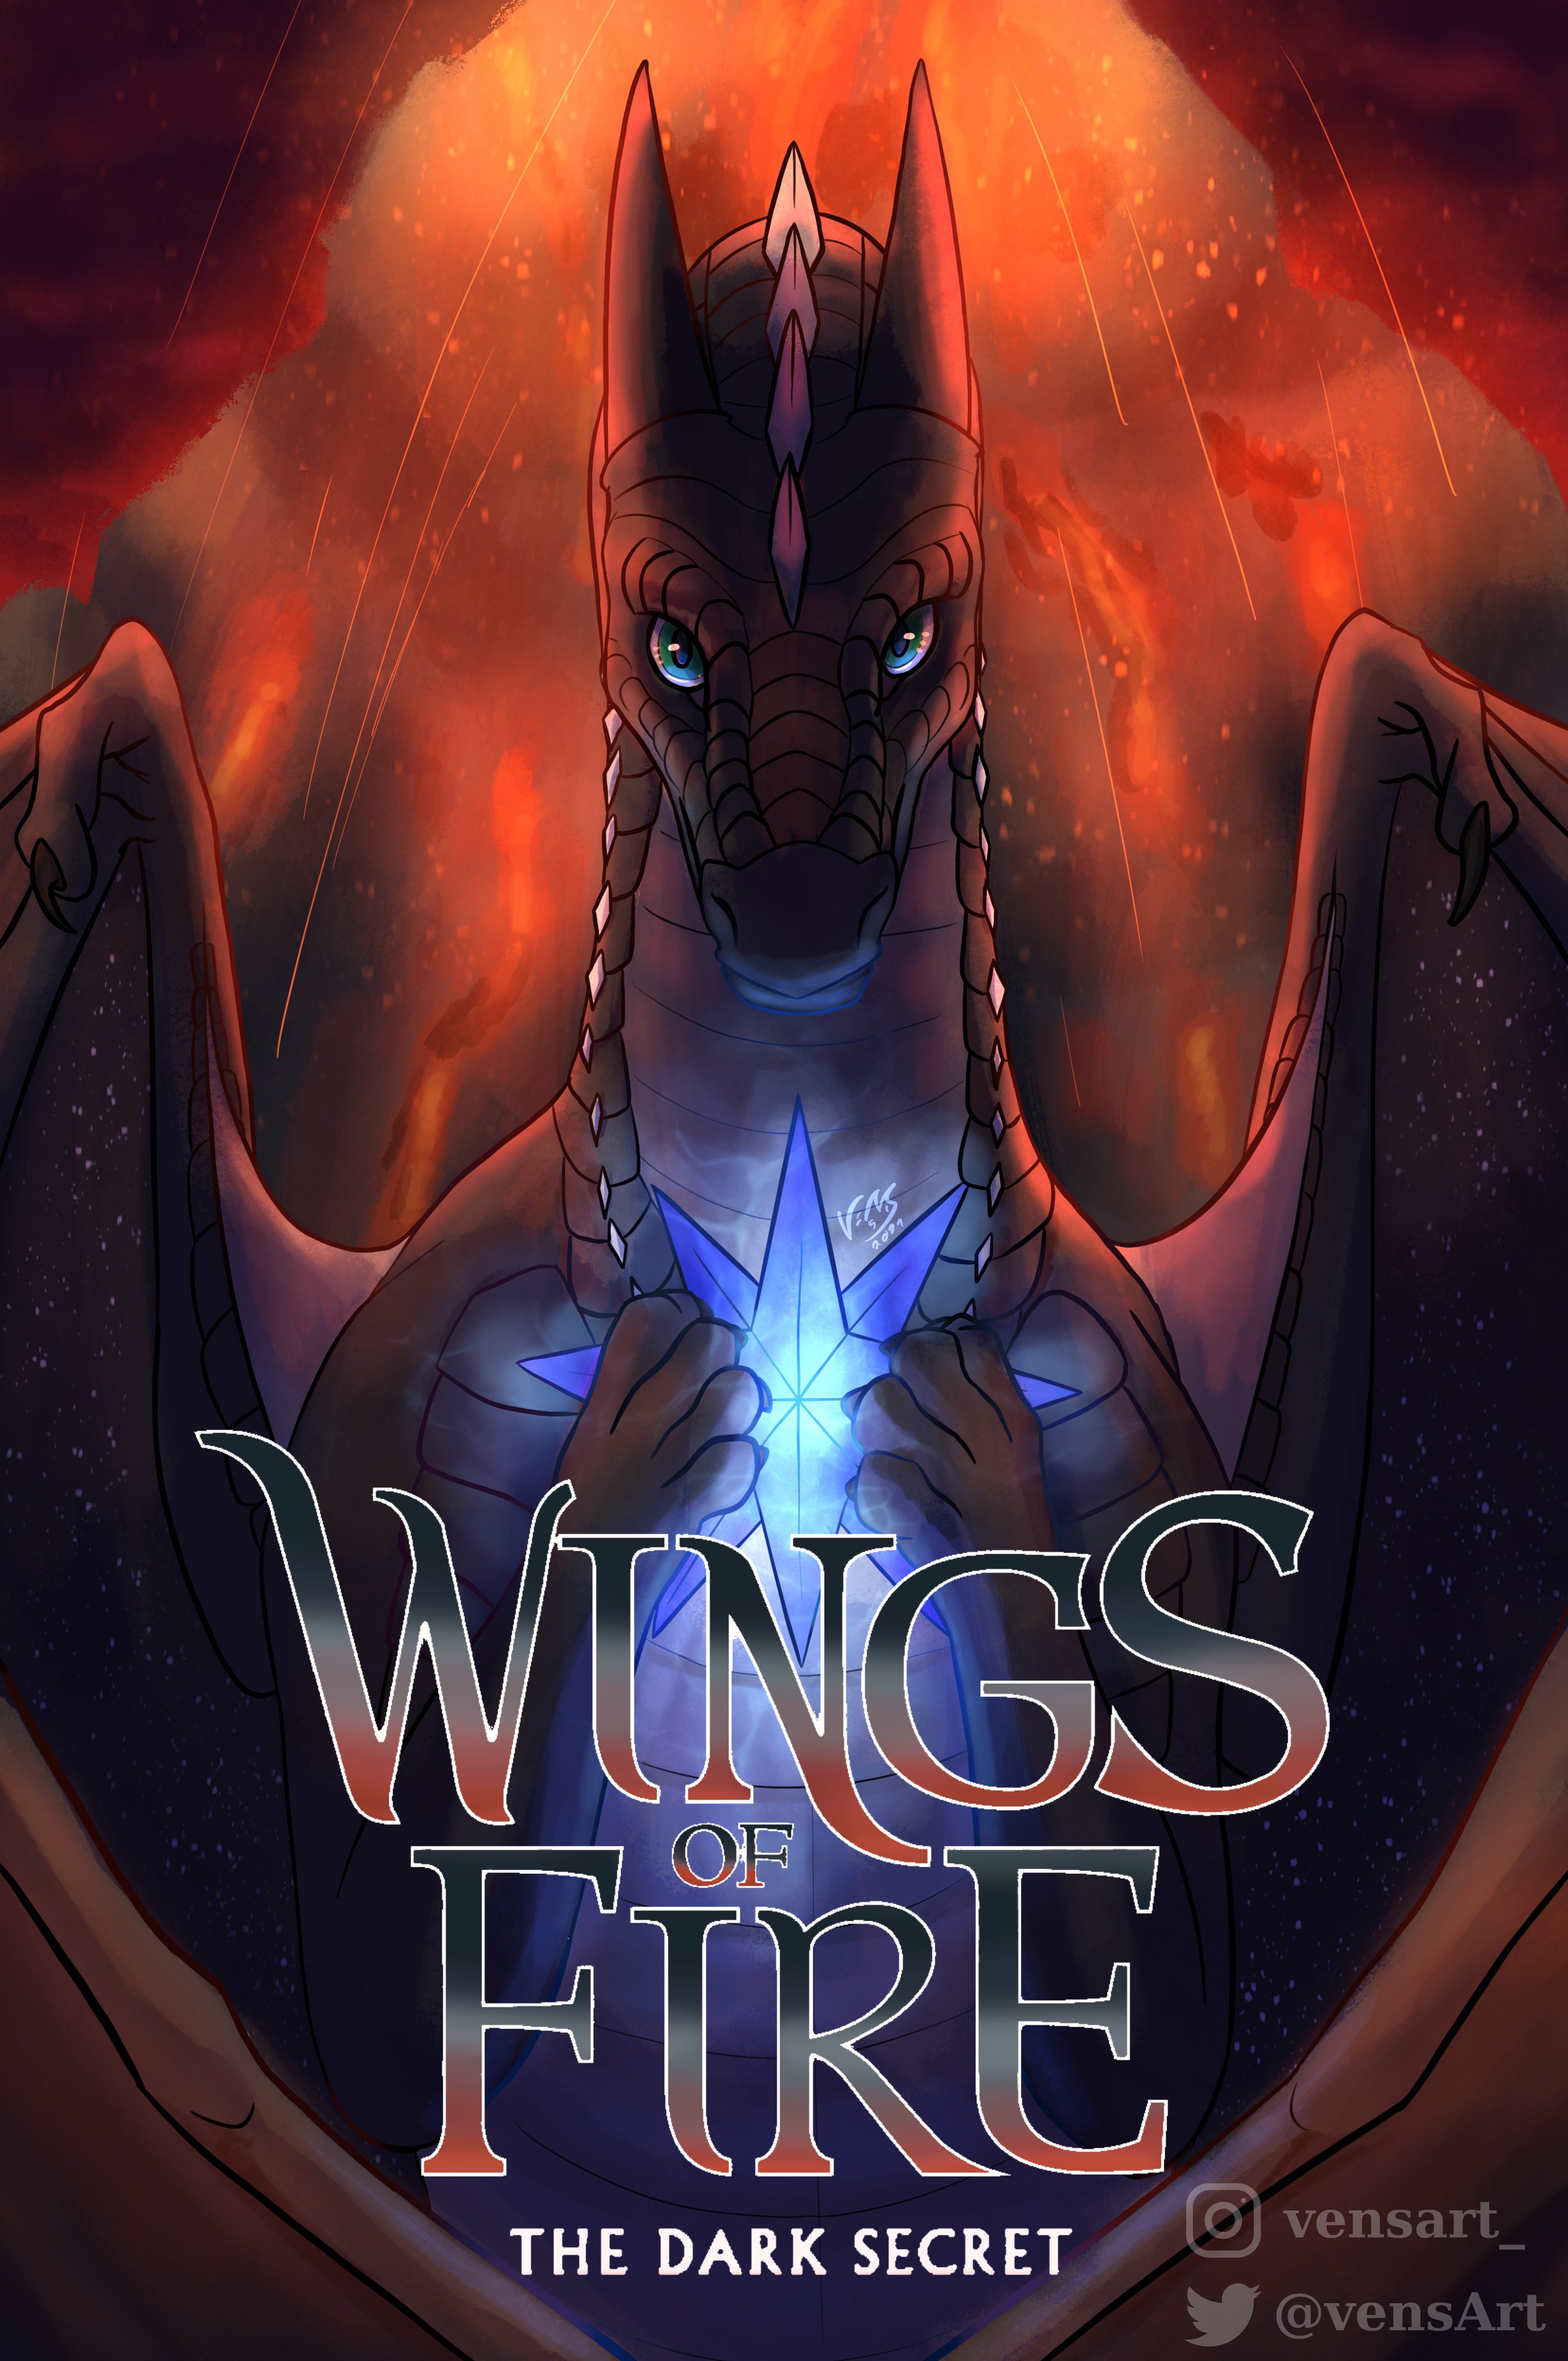 Would You be Dead or Alive? (wings of fire)